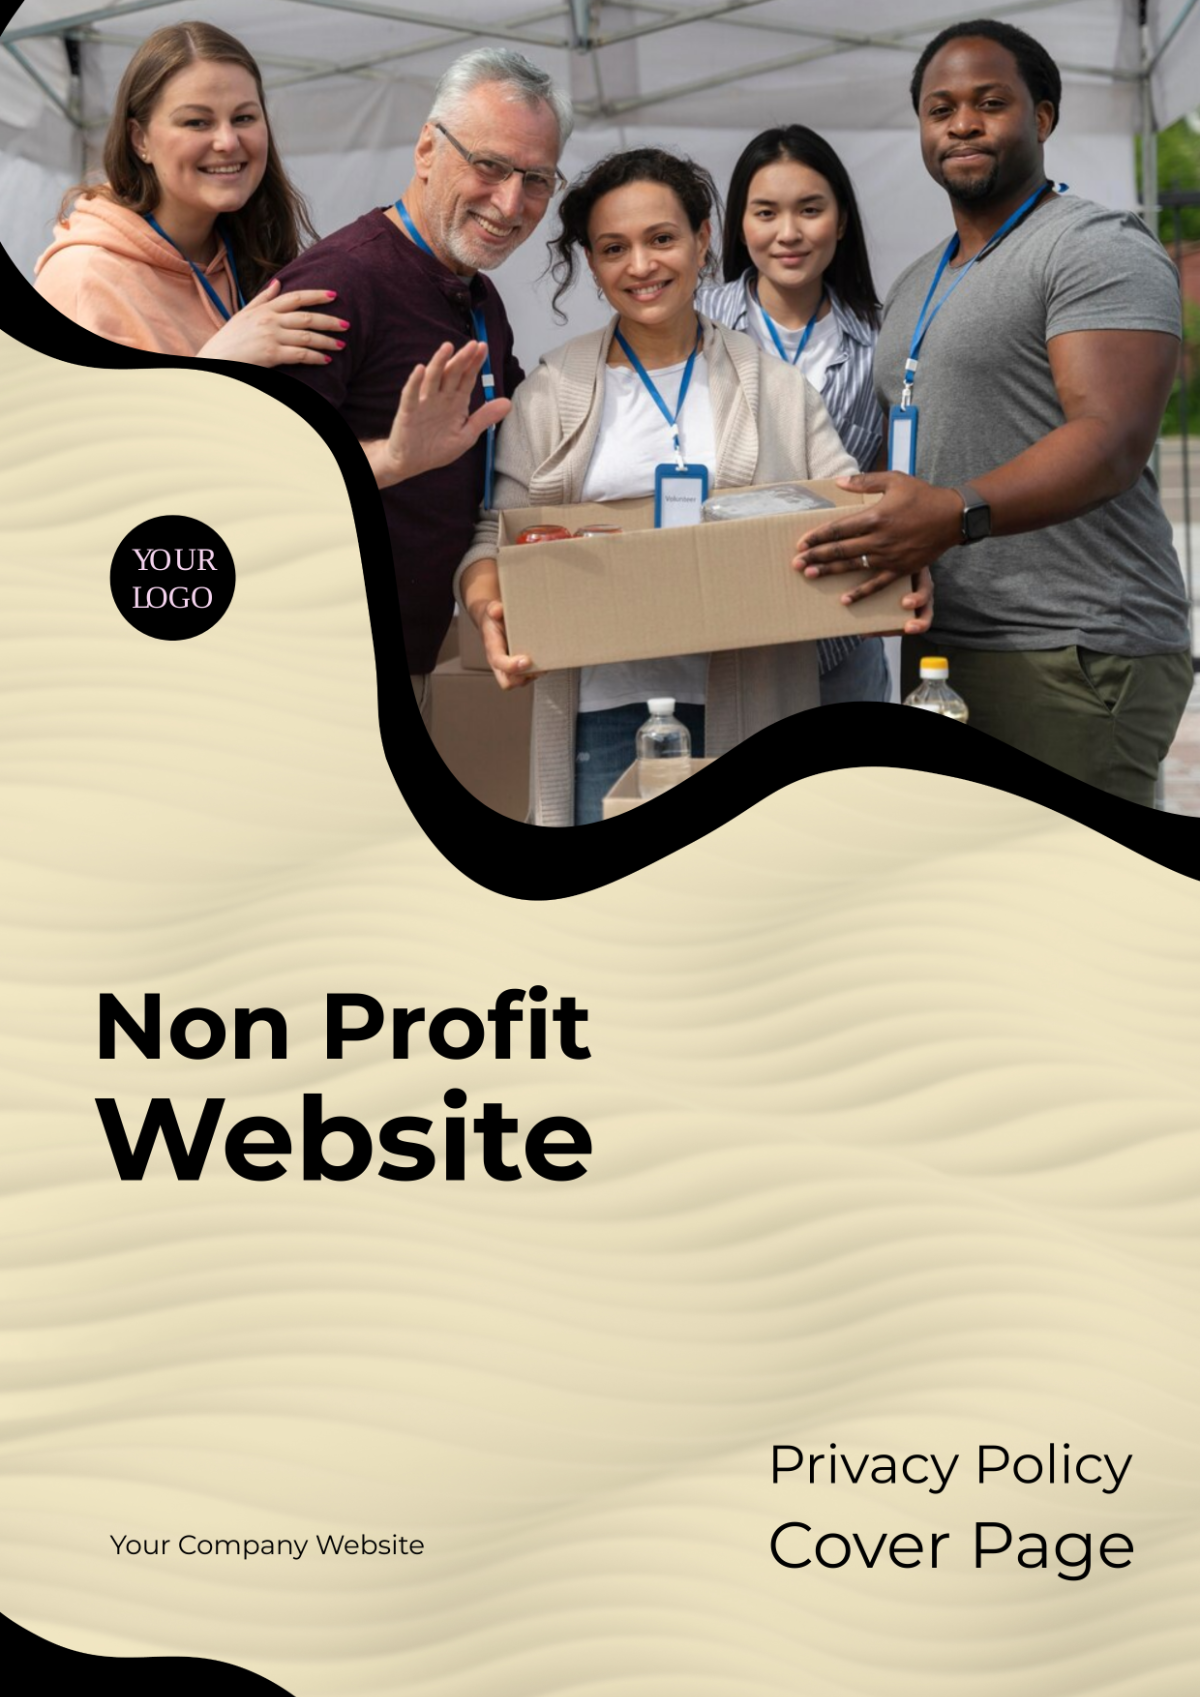 Non Profit Website Privacy Policy Cover Page